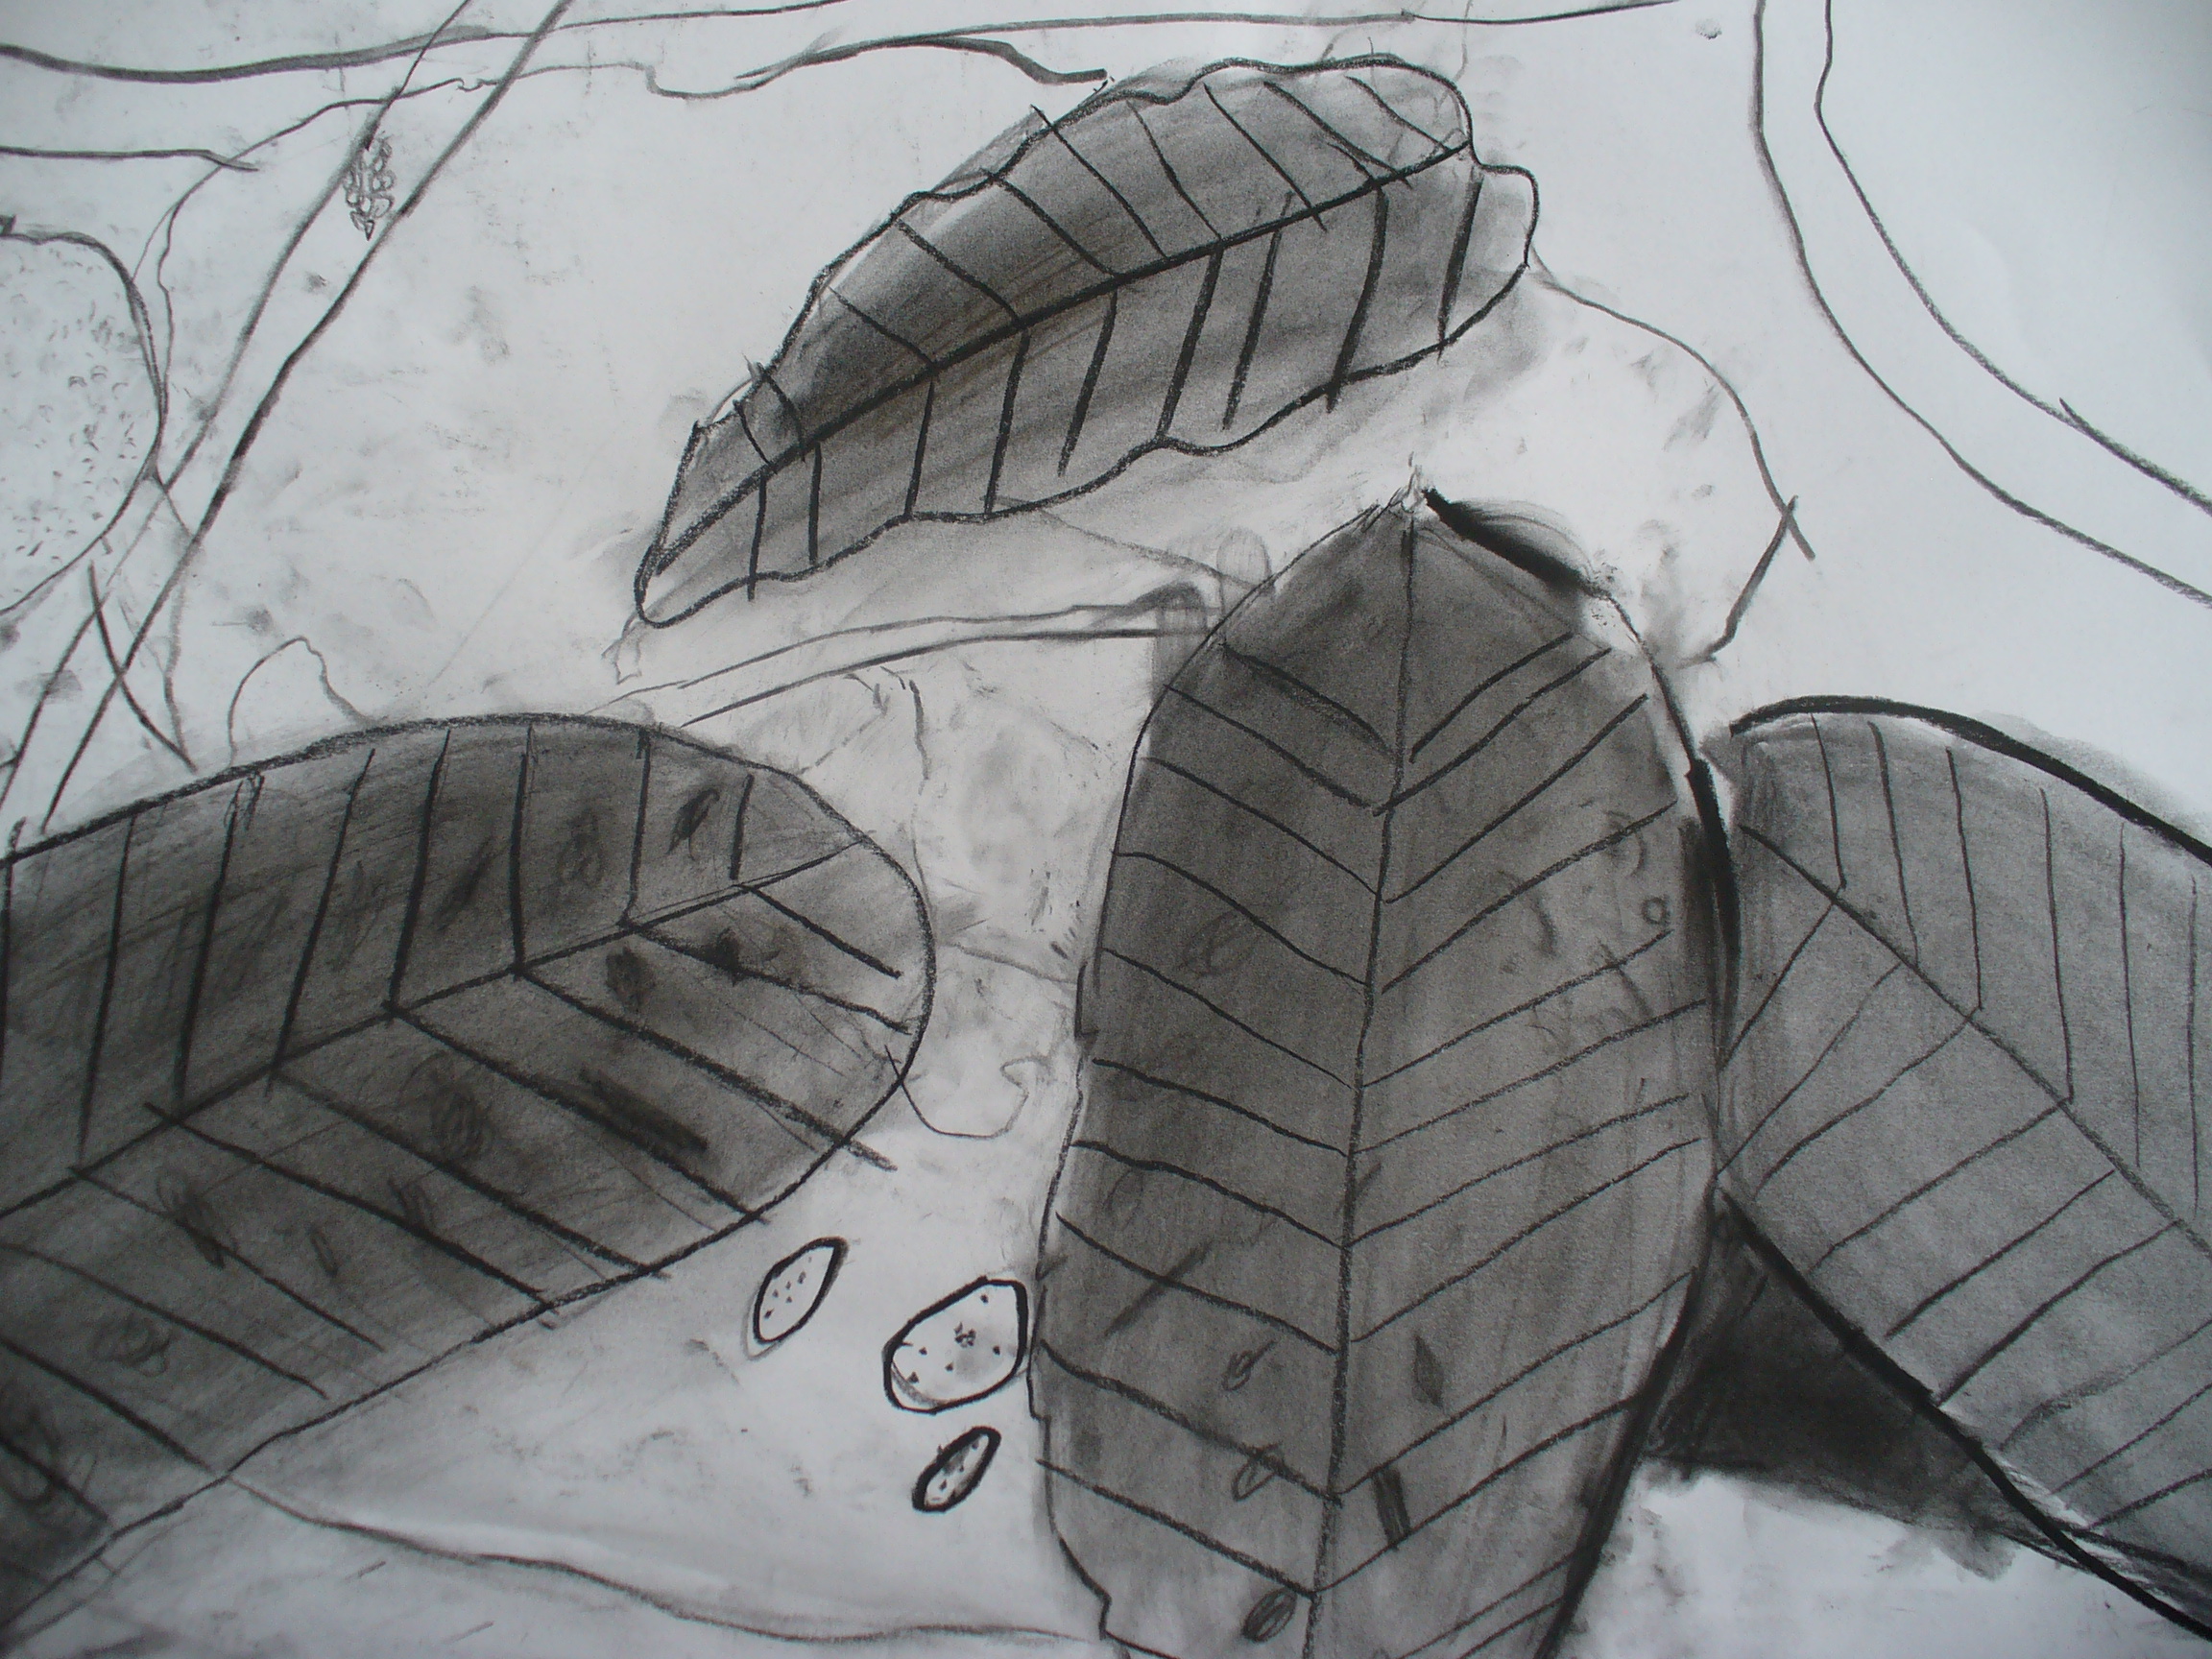 Still life drawings, `Nature`, charcoal on paper